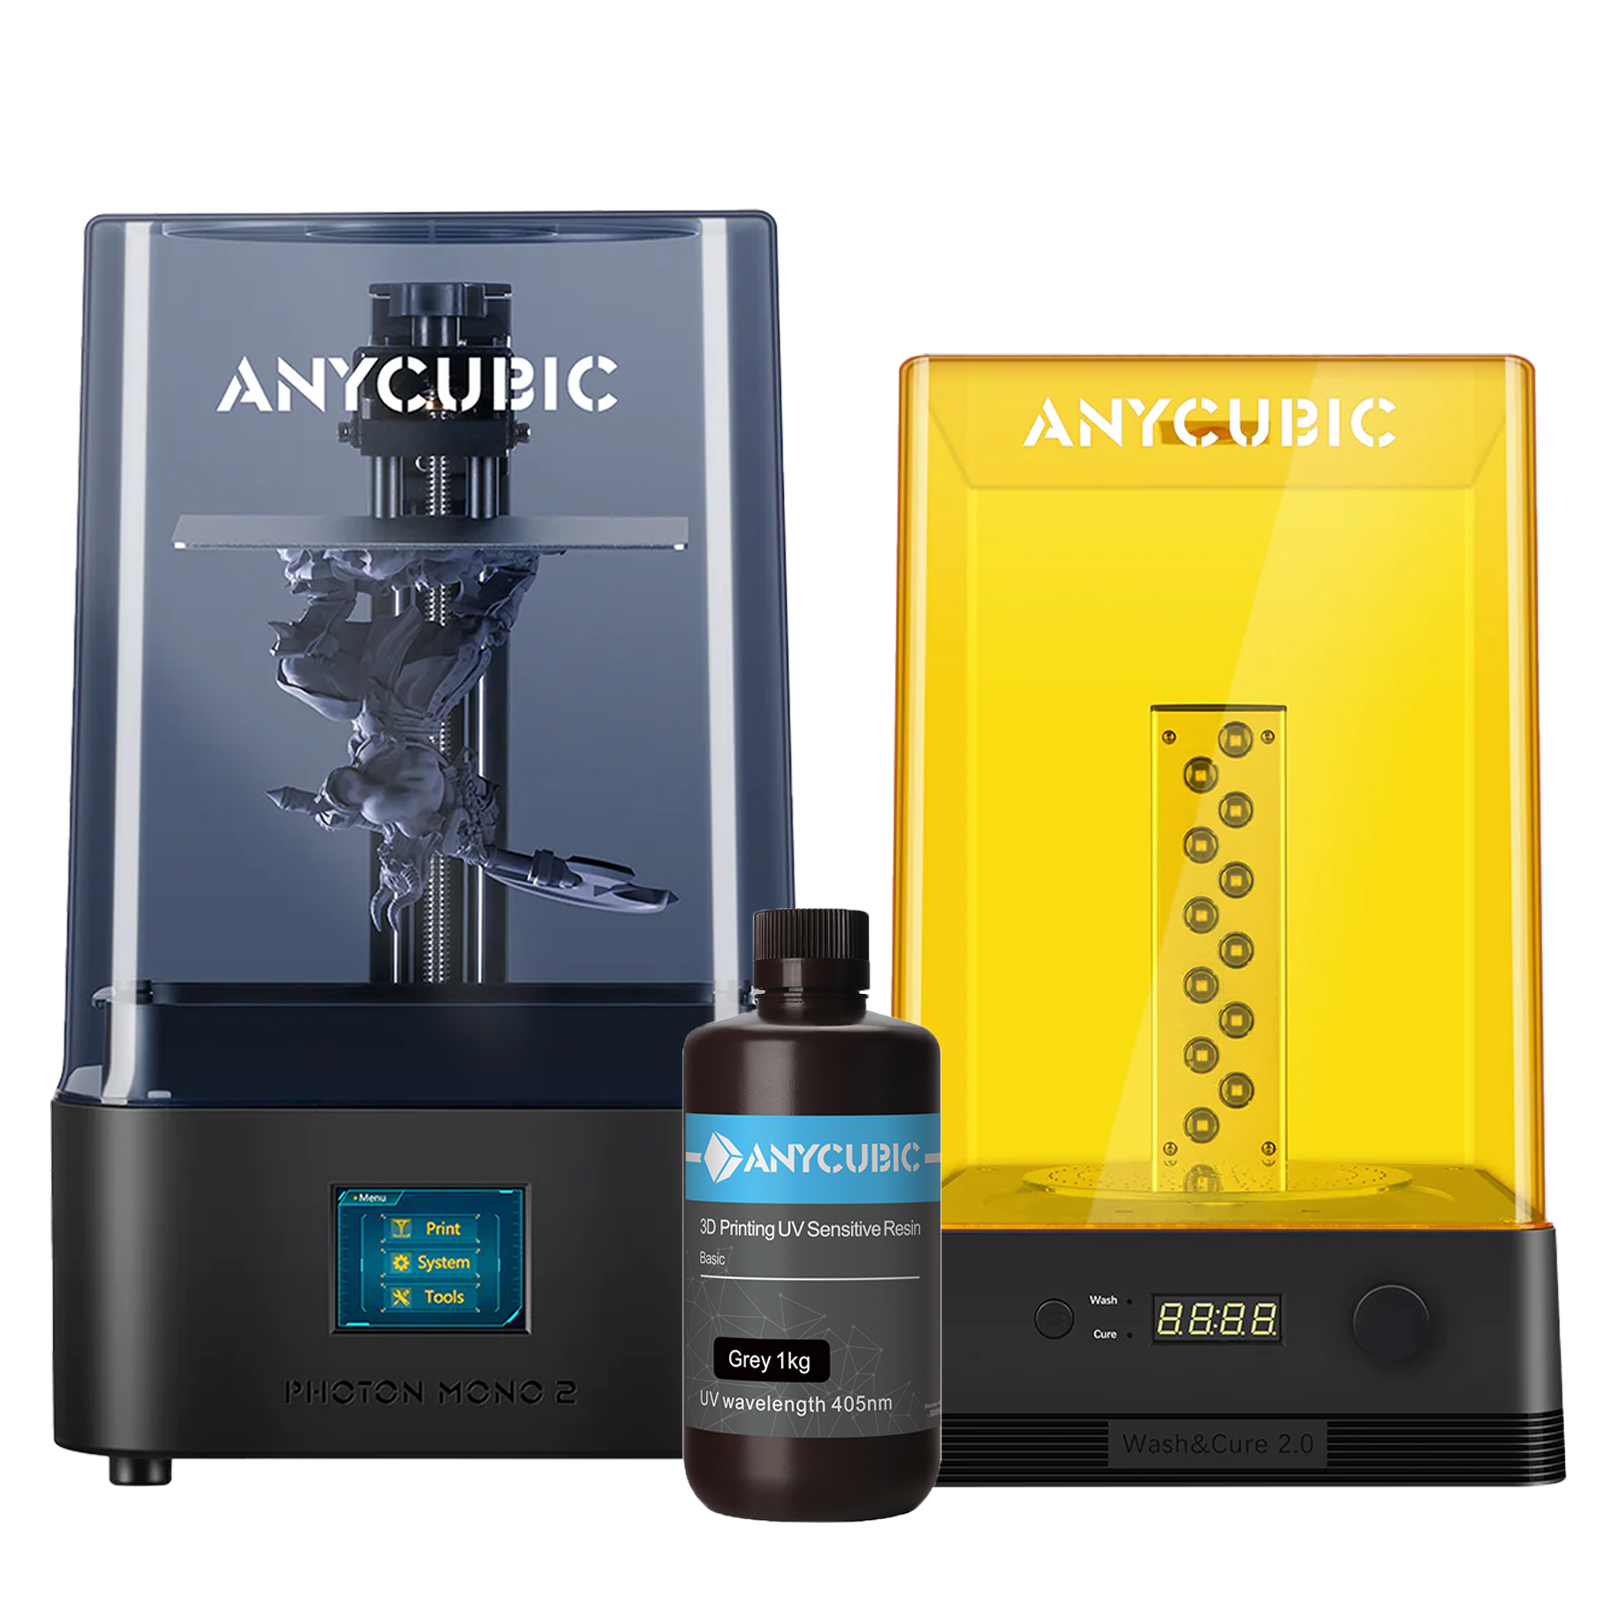 ANYCUBIC Photon Mono 4K LCD Resin 3D Printer 6.23'' Screen/ WashCure 2.0  lot eBay